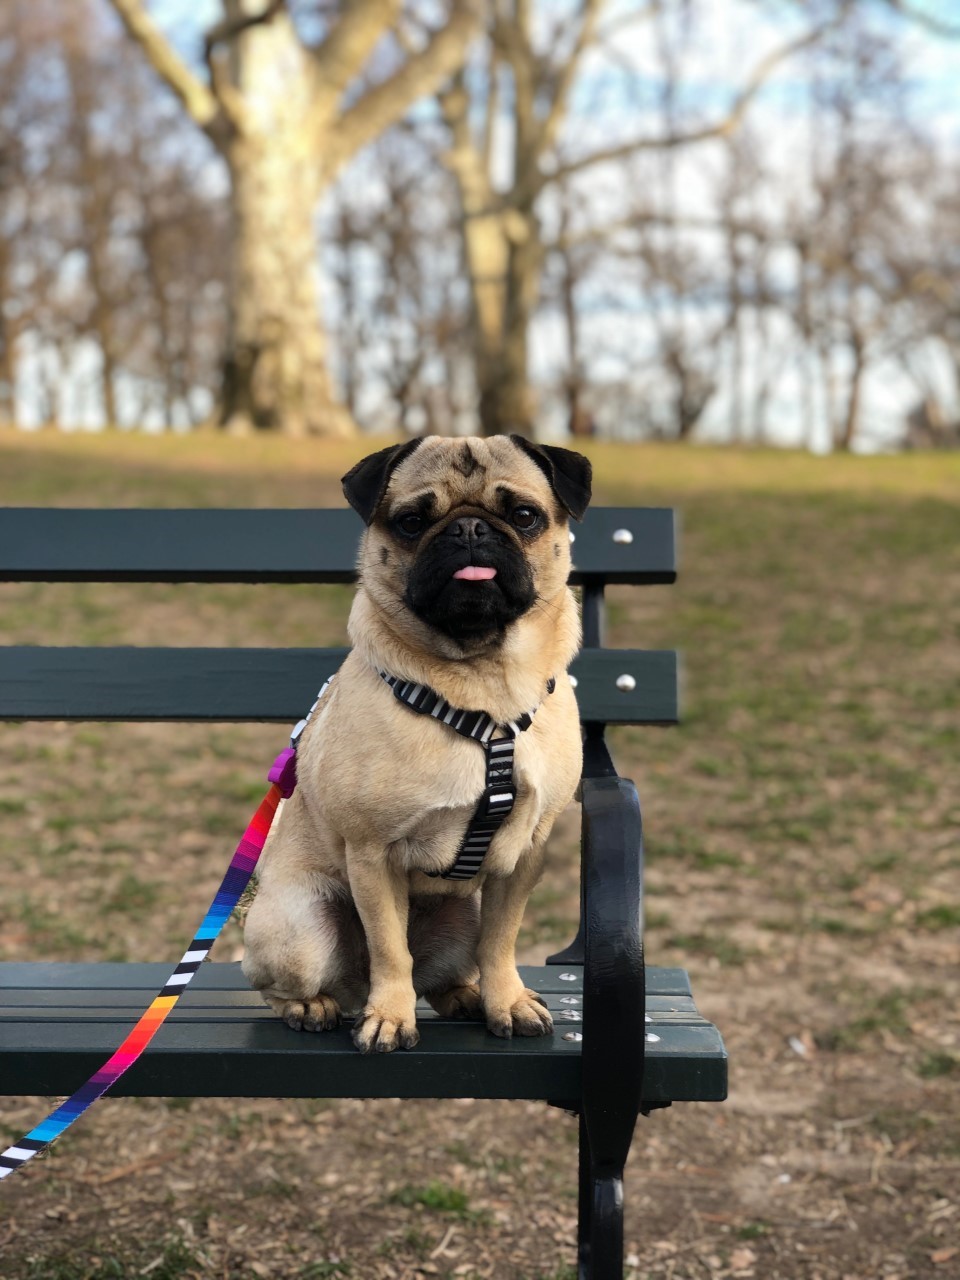 Gertie, the pug sitting on a bench